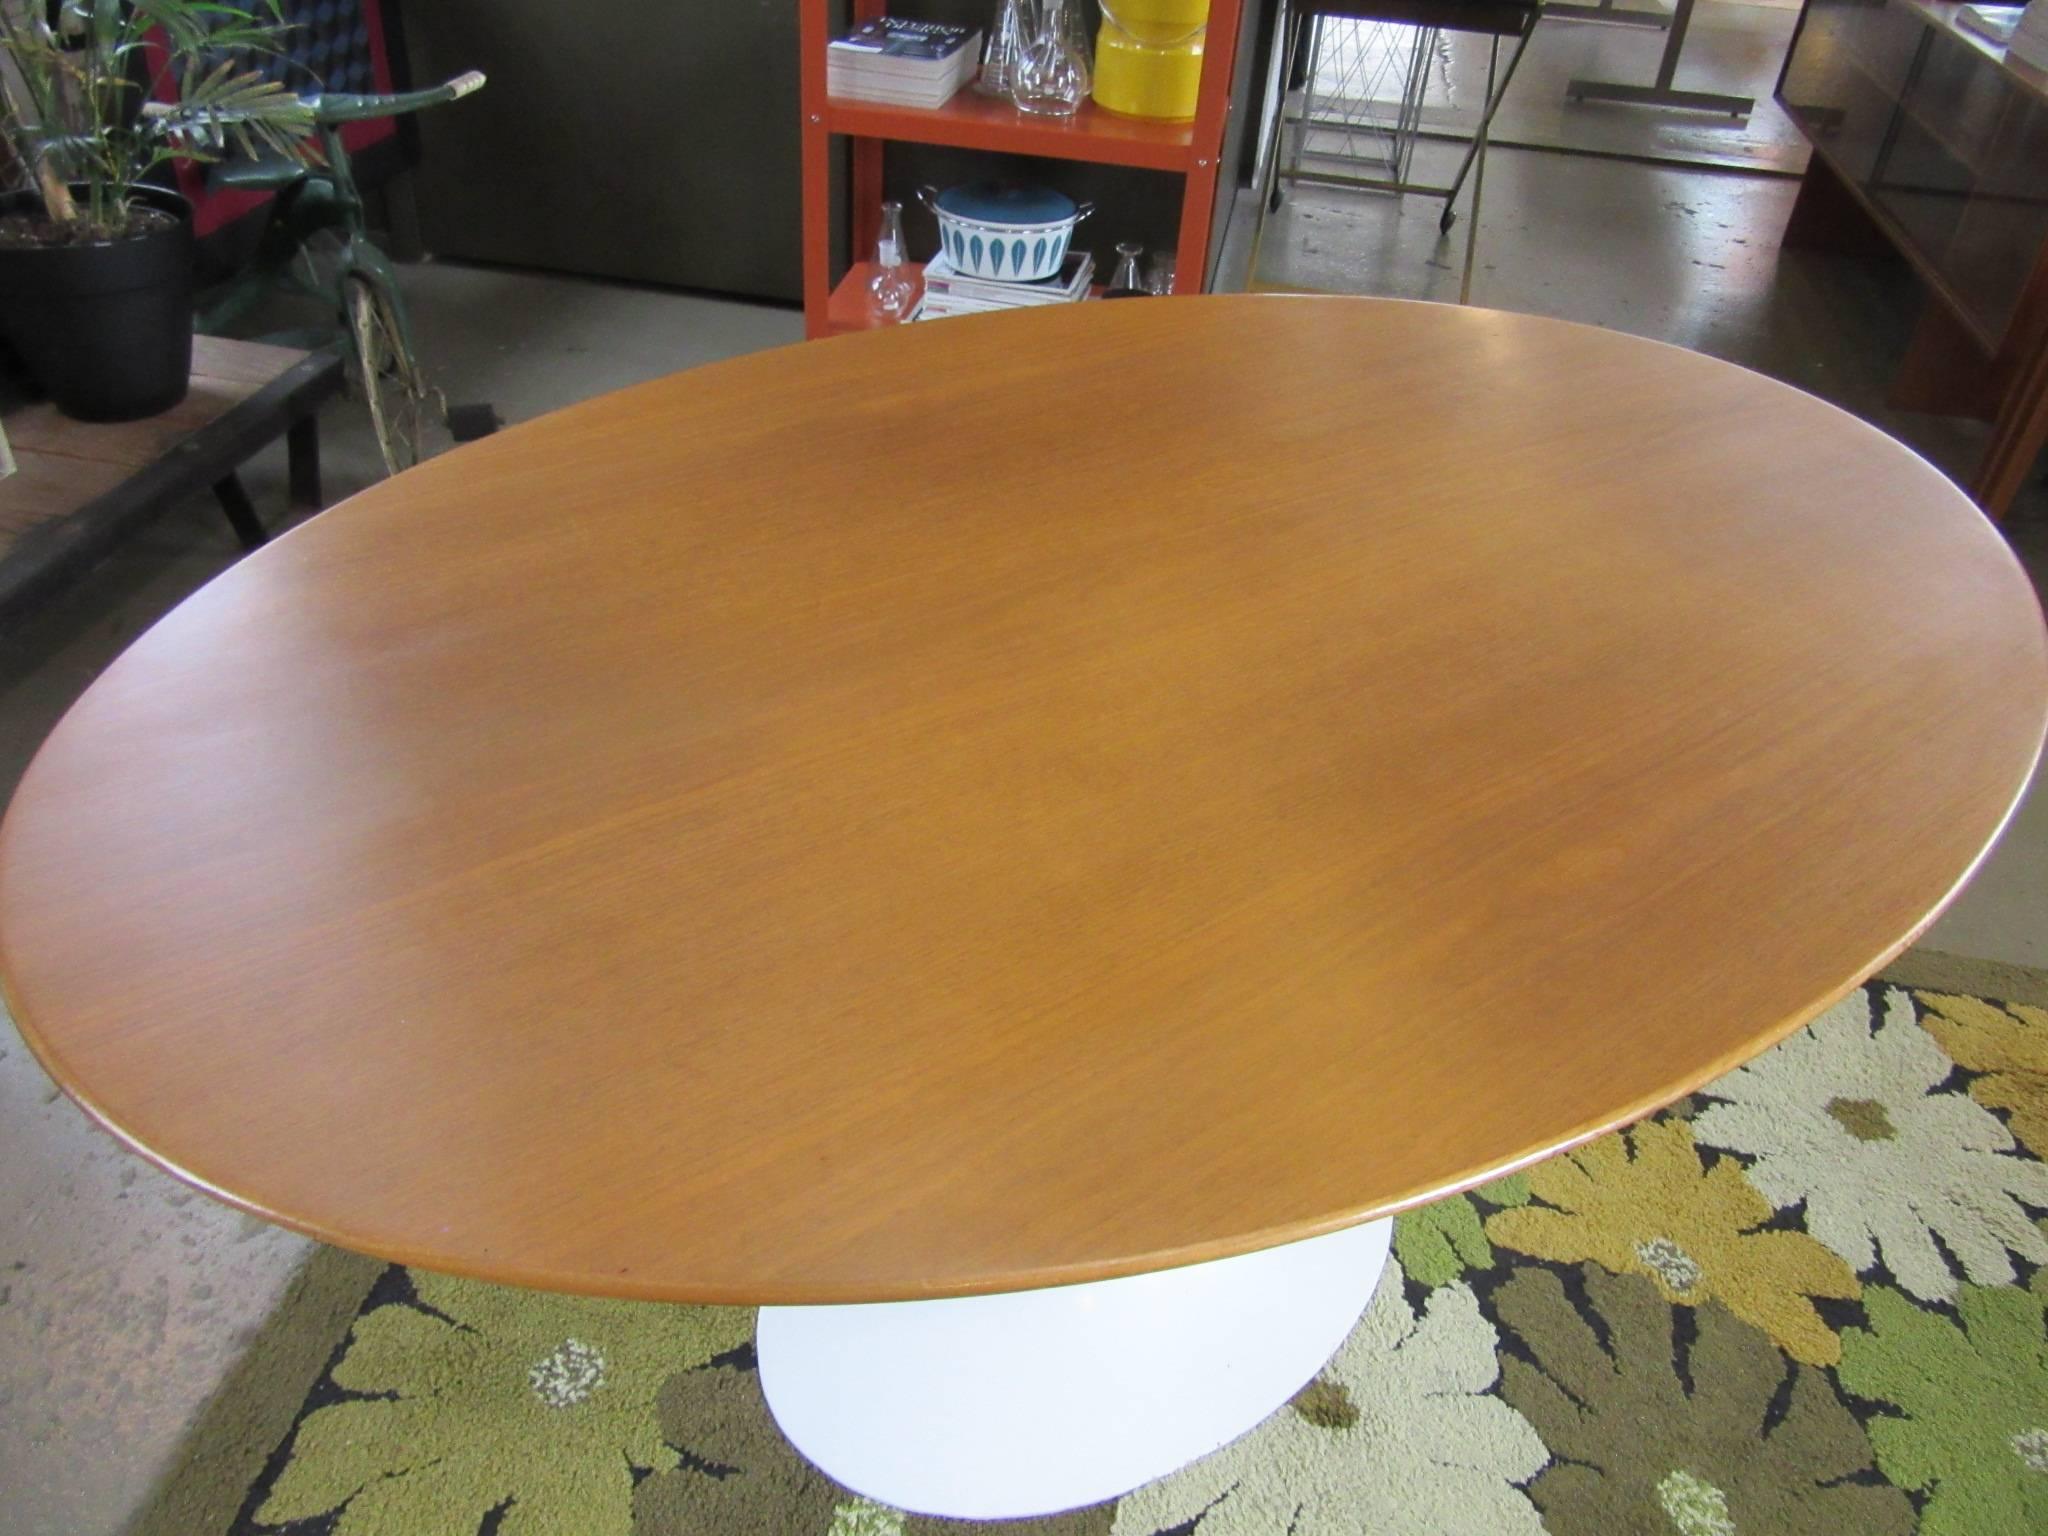 An early special order smaller scale oval walnut topped dining table with matching oval shaped cast iron tulip base. This table looks exactly like the larger version but it's half the size for that tight eat in kitchen, dining area or entrance way,